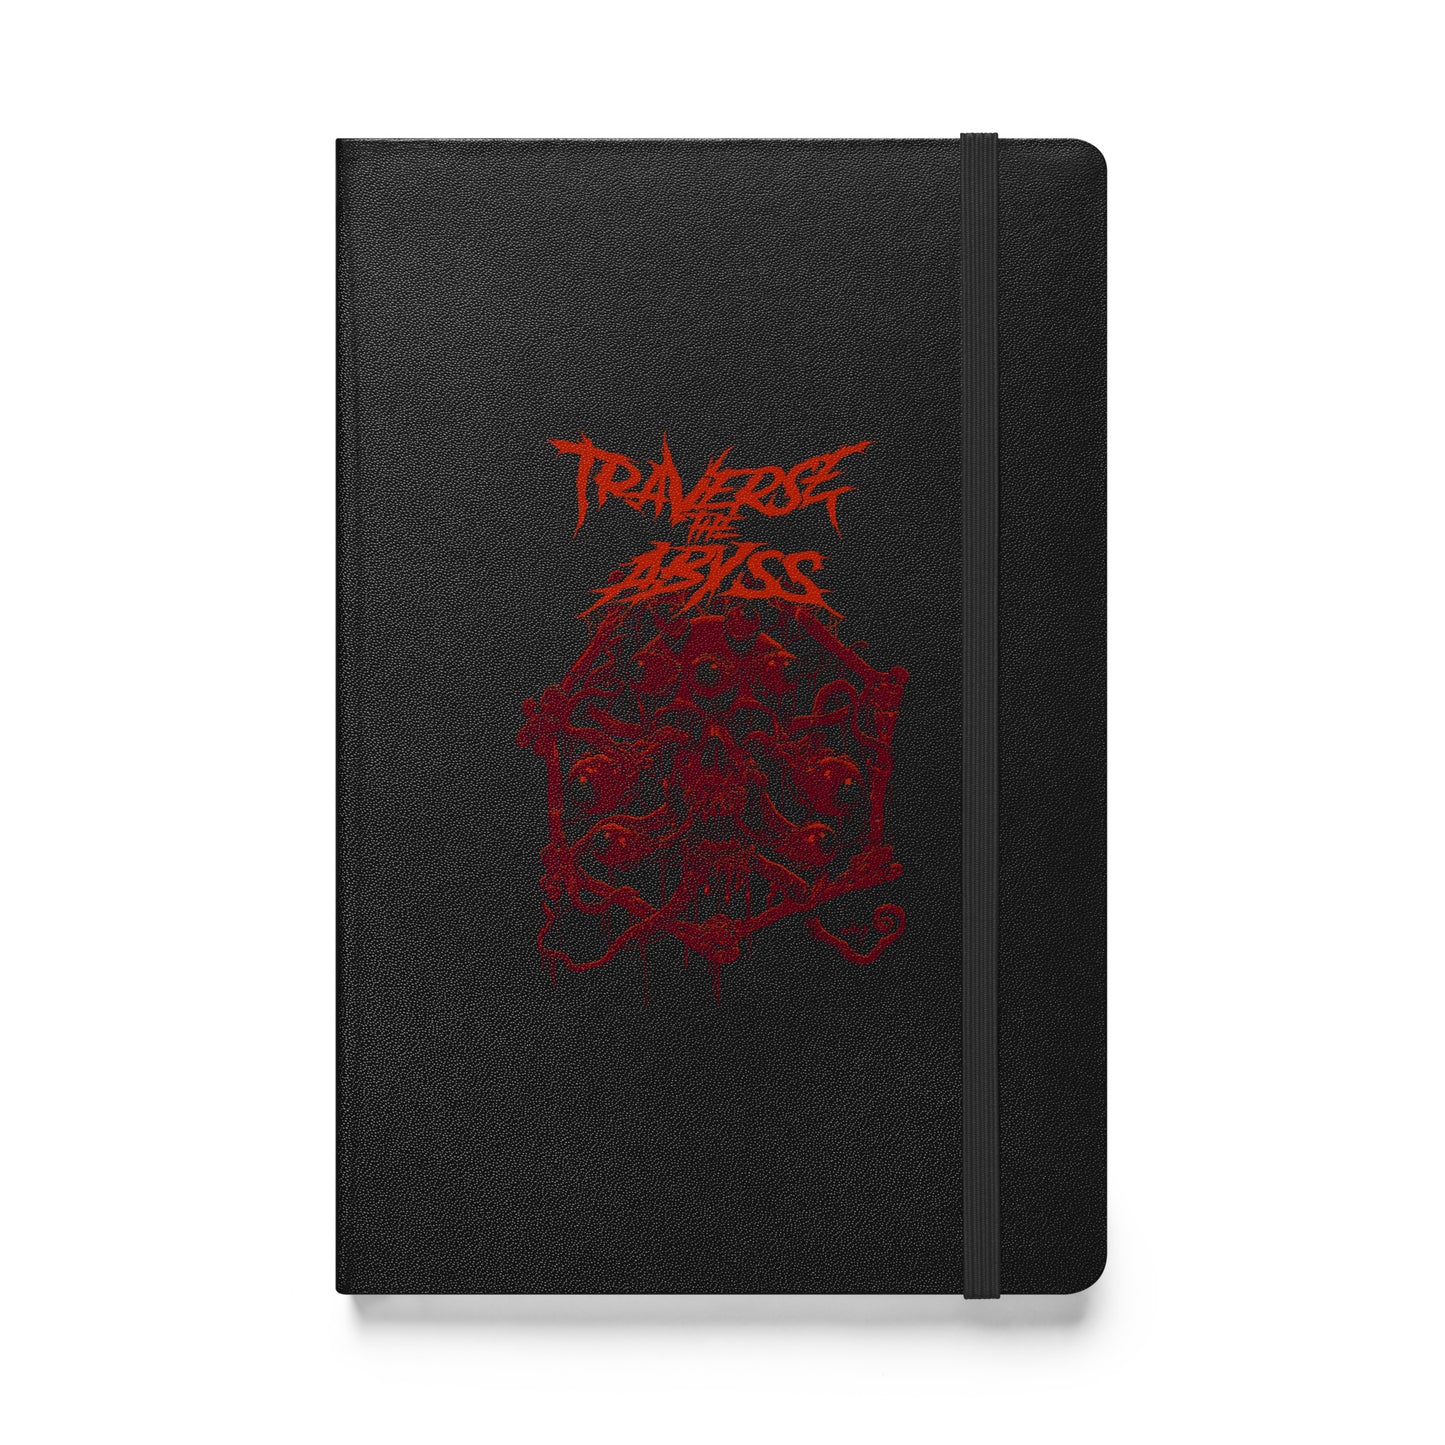 Traverse the Abyss Hardcover bound notebook